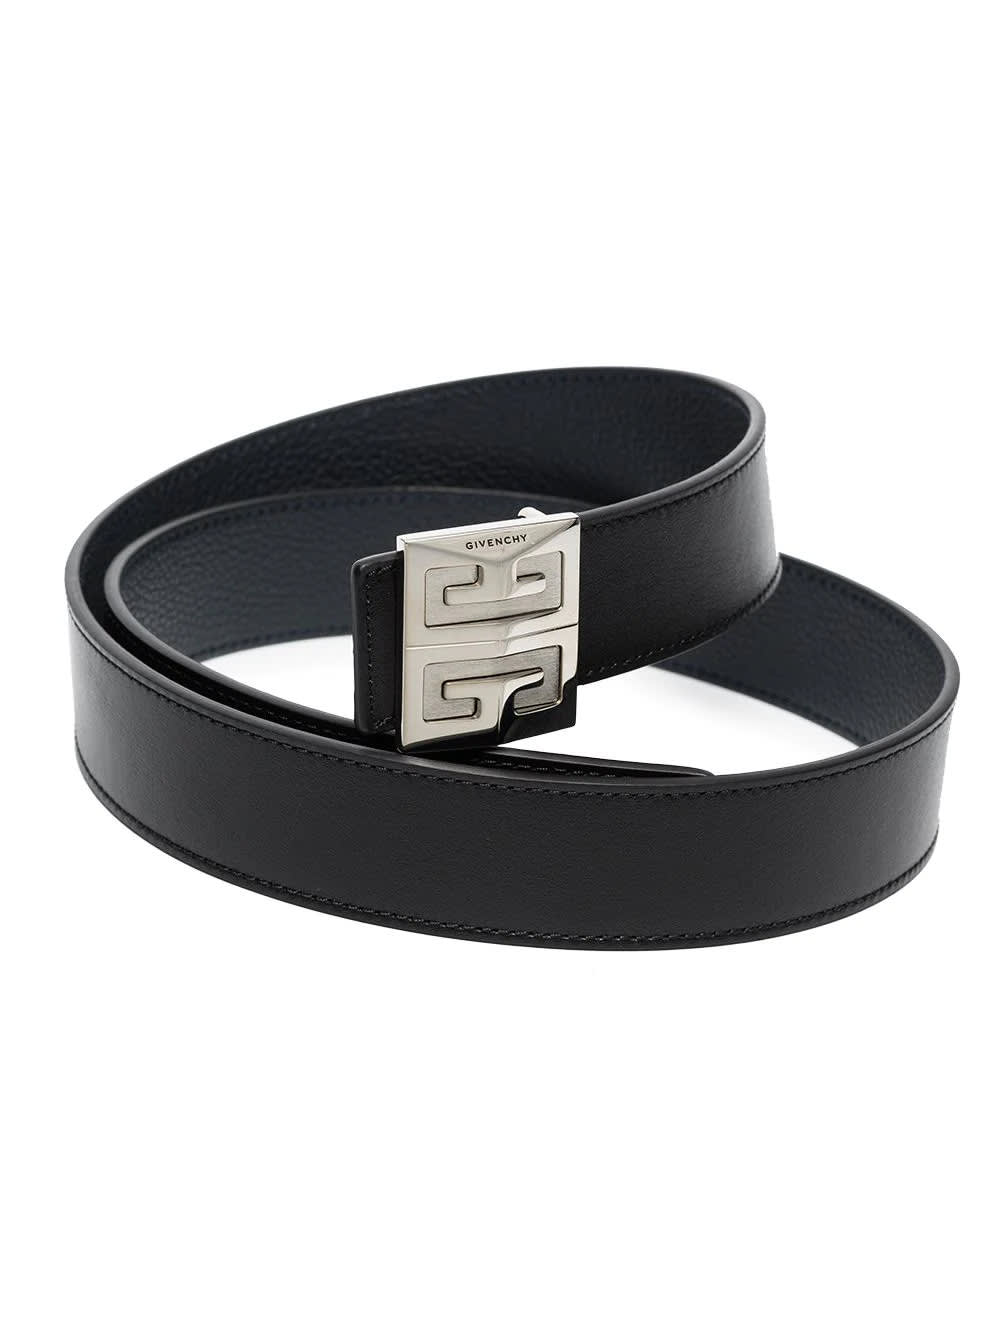 Givenchy Man 4g Reversible Belt Black And Dark Grained | italist